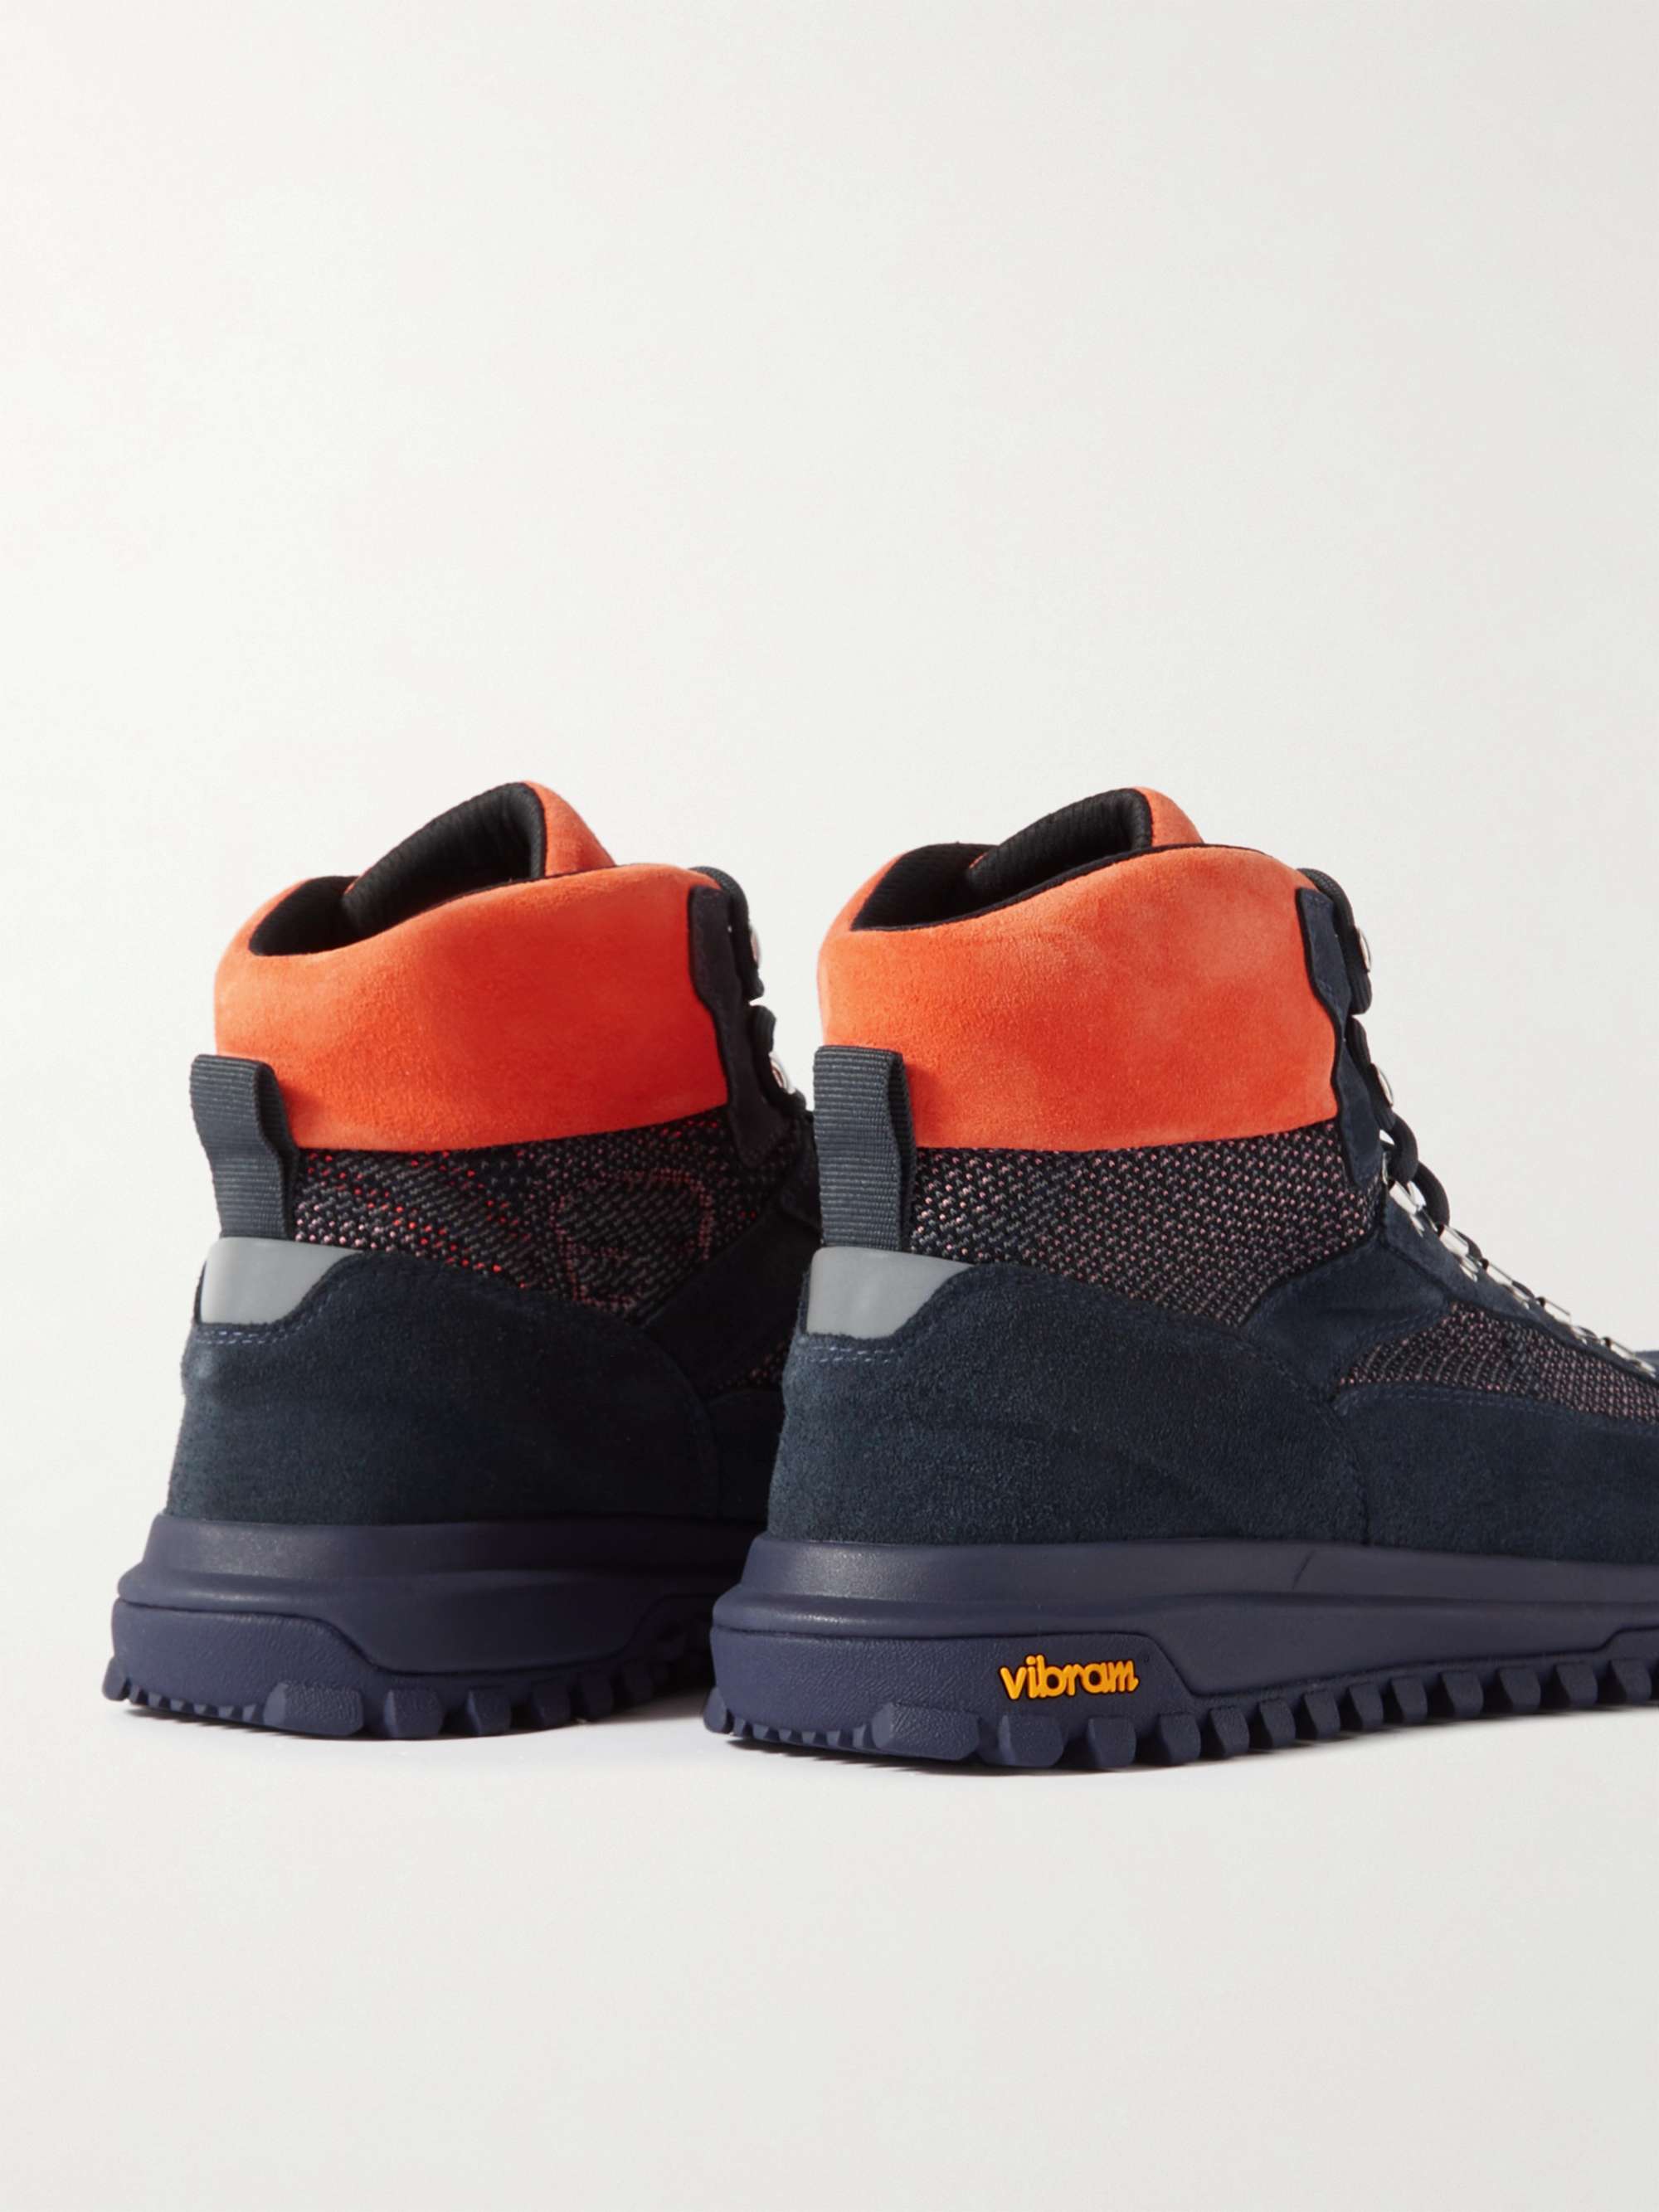 DIEMME One Hiker Suede and BYBORRE® 3D™ Boots